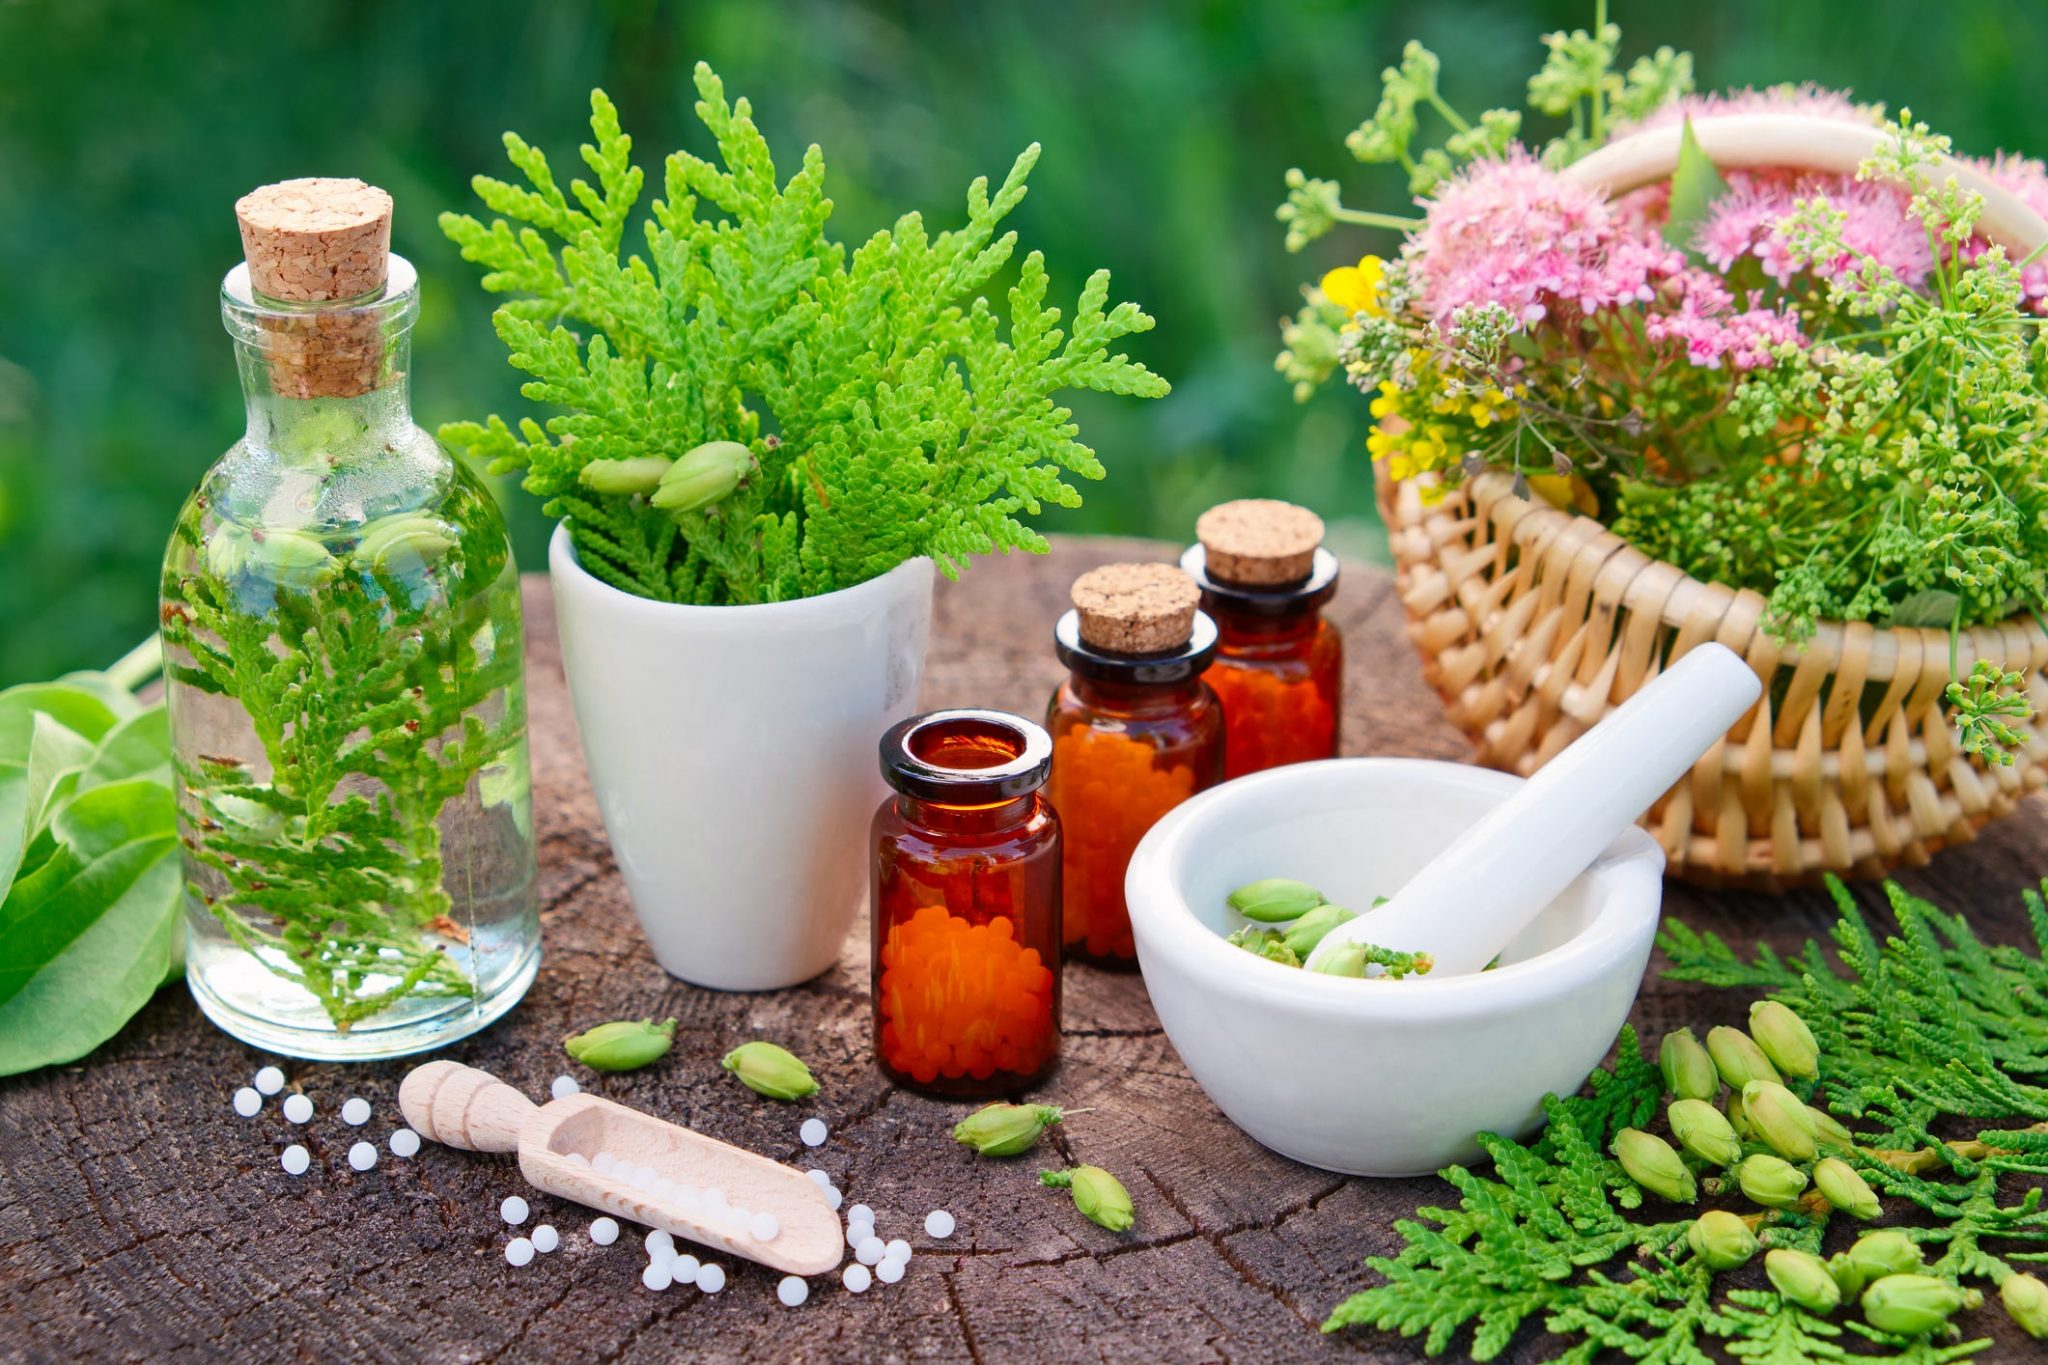 The Energy Healing Power of Natural Medicine